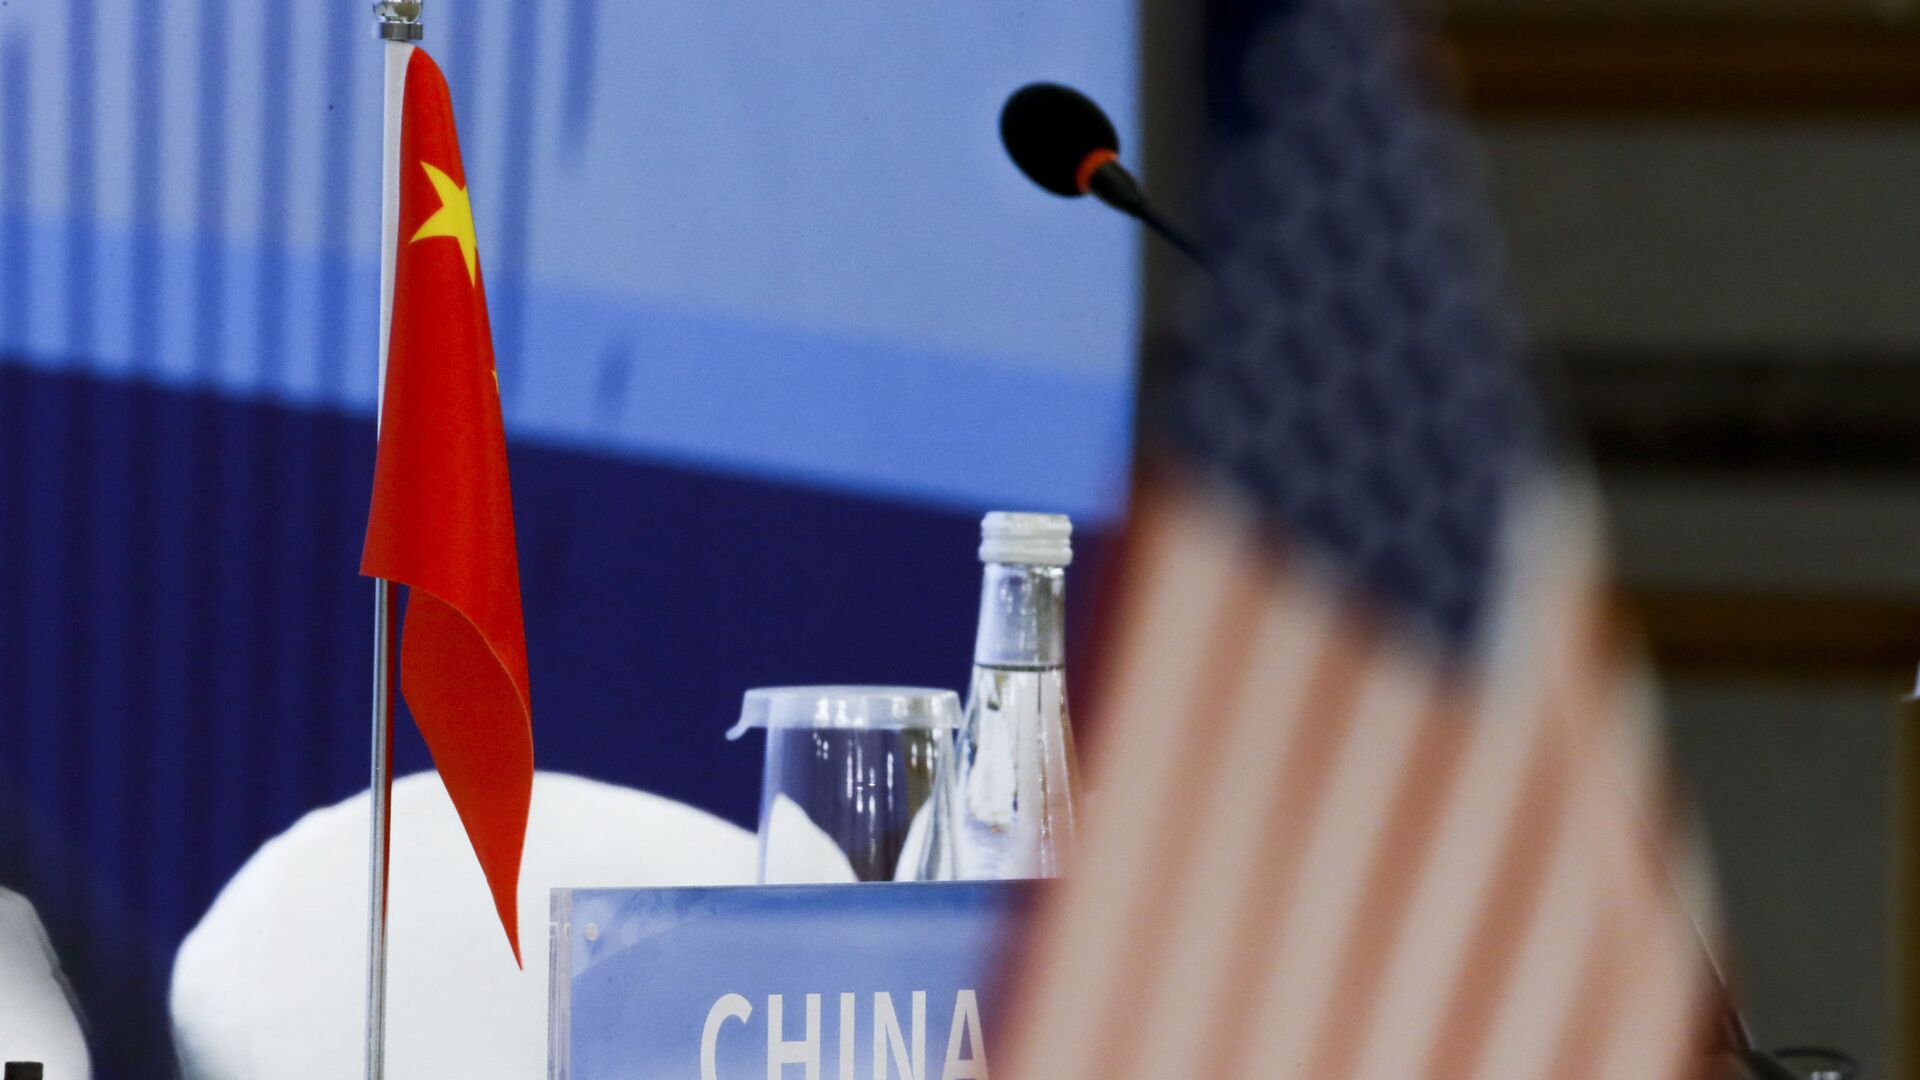 The Chinese and U.S. national flags are seen before the start of a Treaty on the Non-Proliferation of Nuclear Weapons (NPT) conference in Beijing of the UN Security Council's five permanent members (P5) China, France, Russia, the United Kingdom, and the United States, China, Wednesday, Jan. 30, 2019.  - Sputnik International, 1920, 18.03.2022